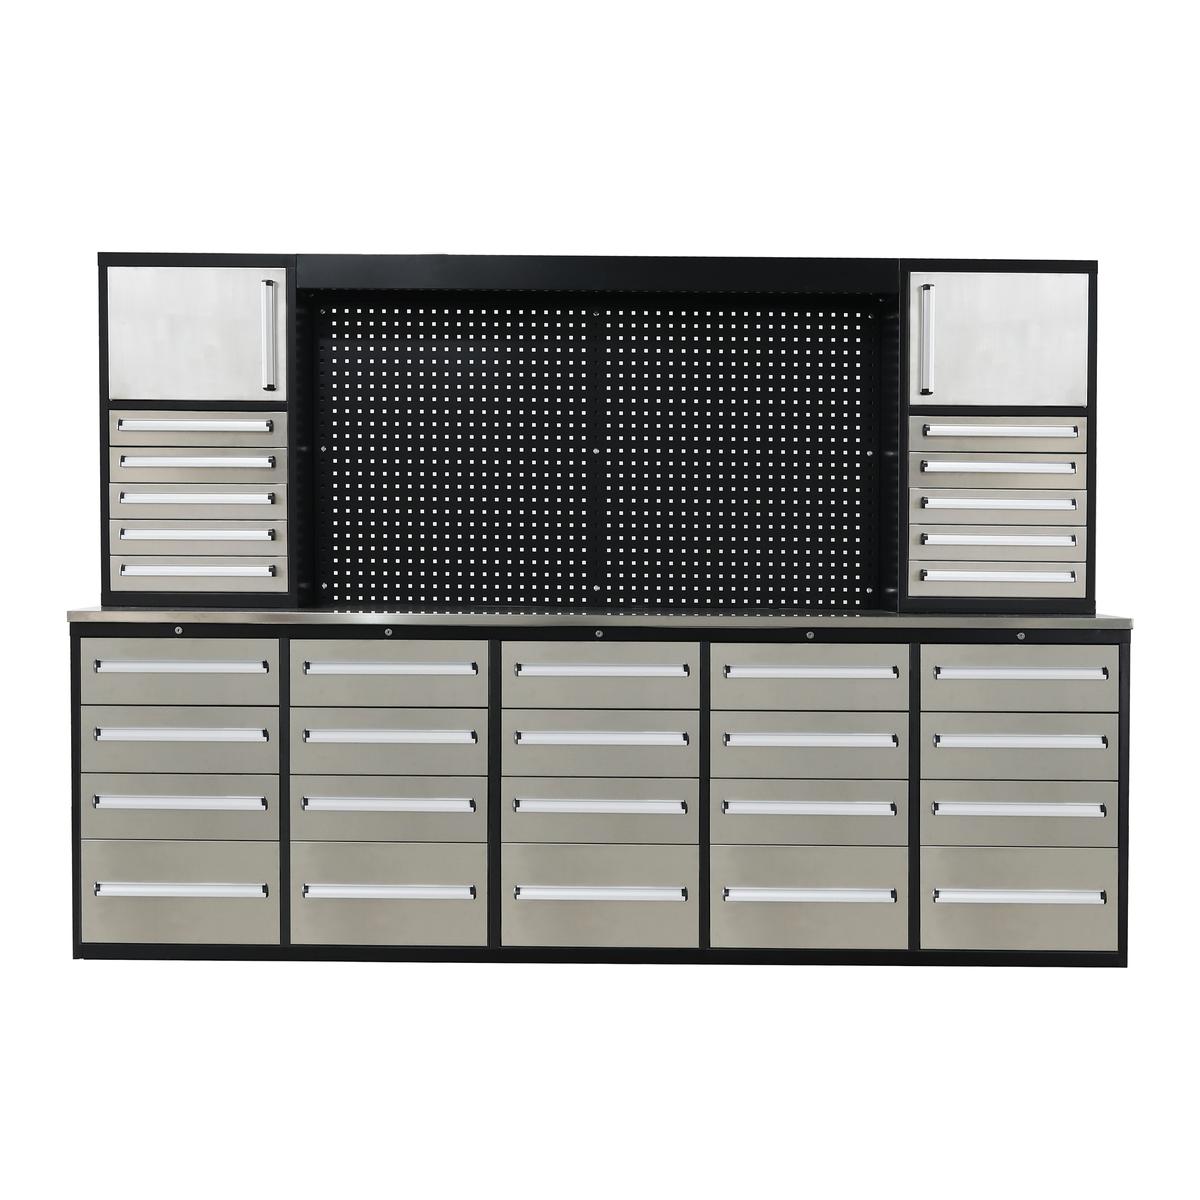 Value Industrial Silver 10FT-30D Workbench Cabinets - 10 foot wide - 30 drawers